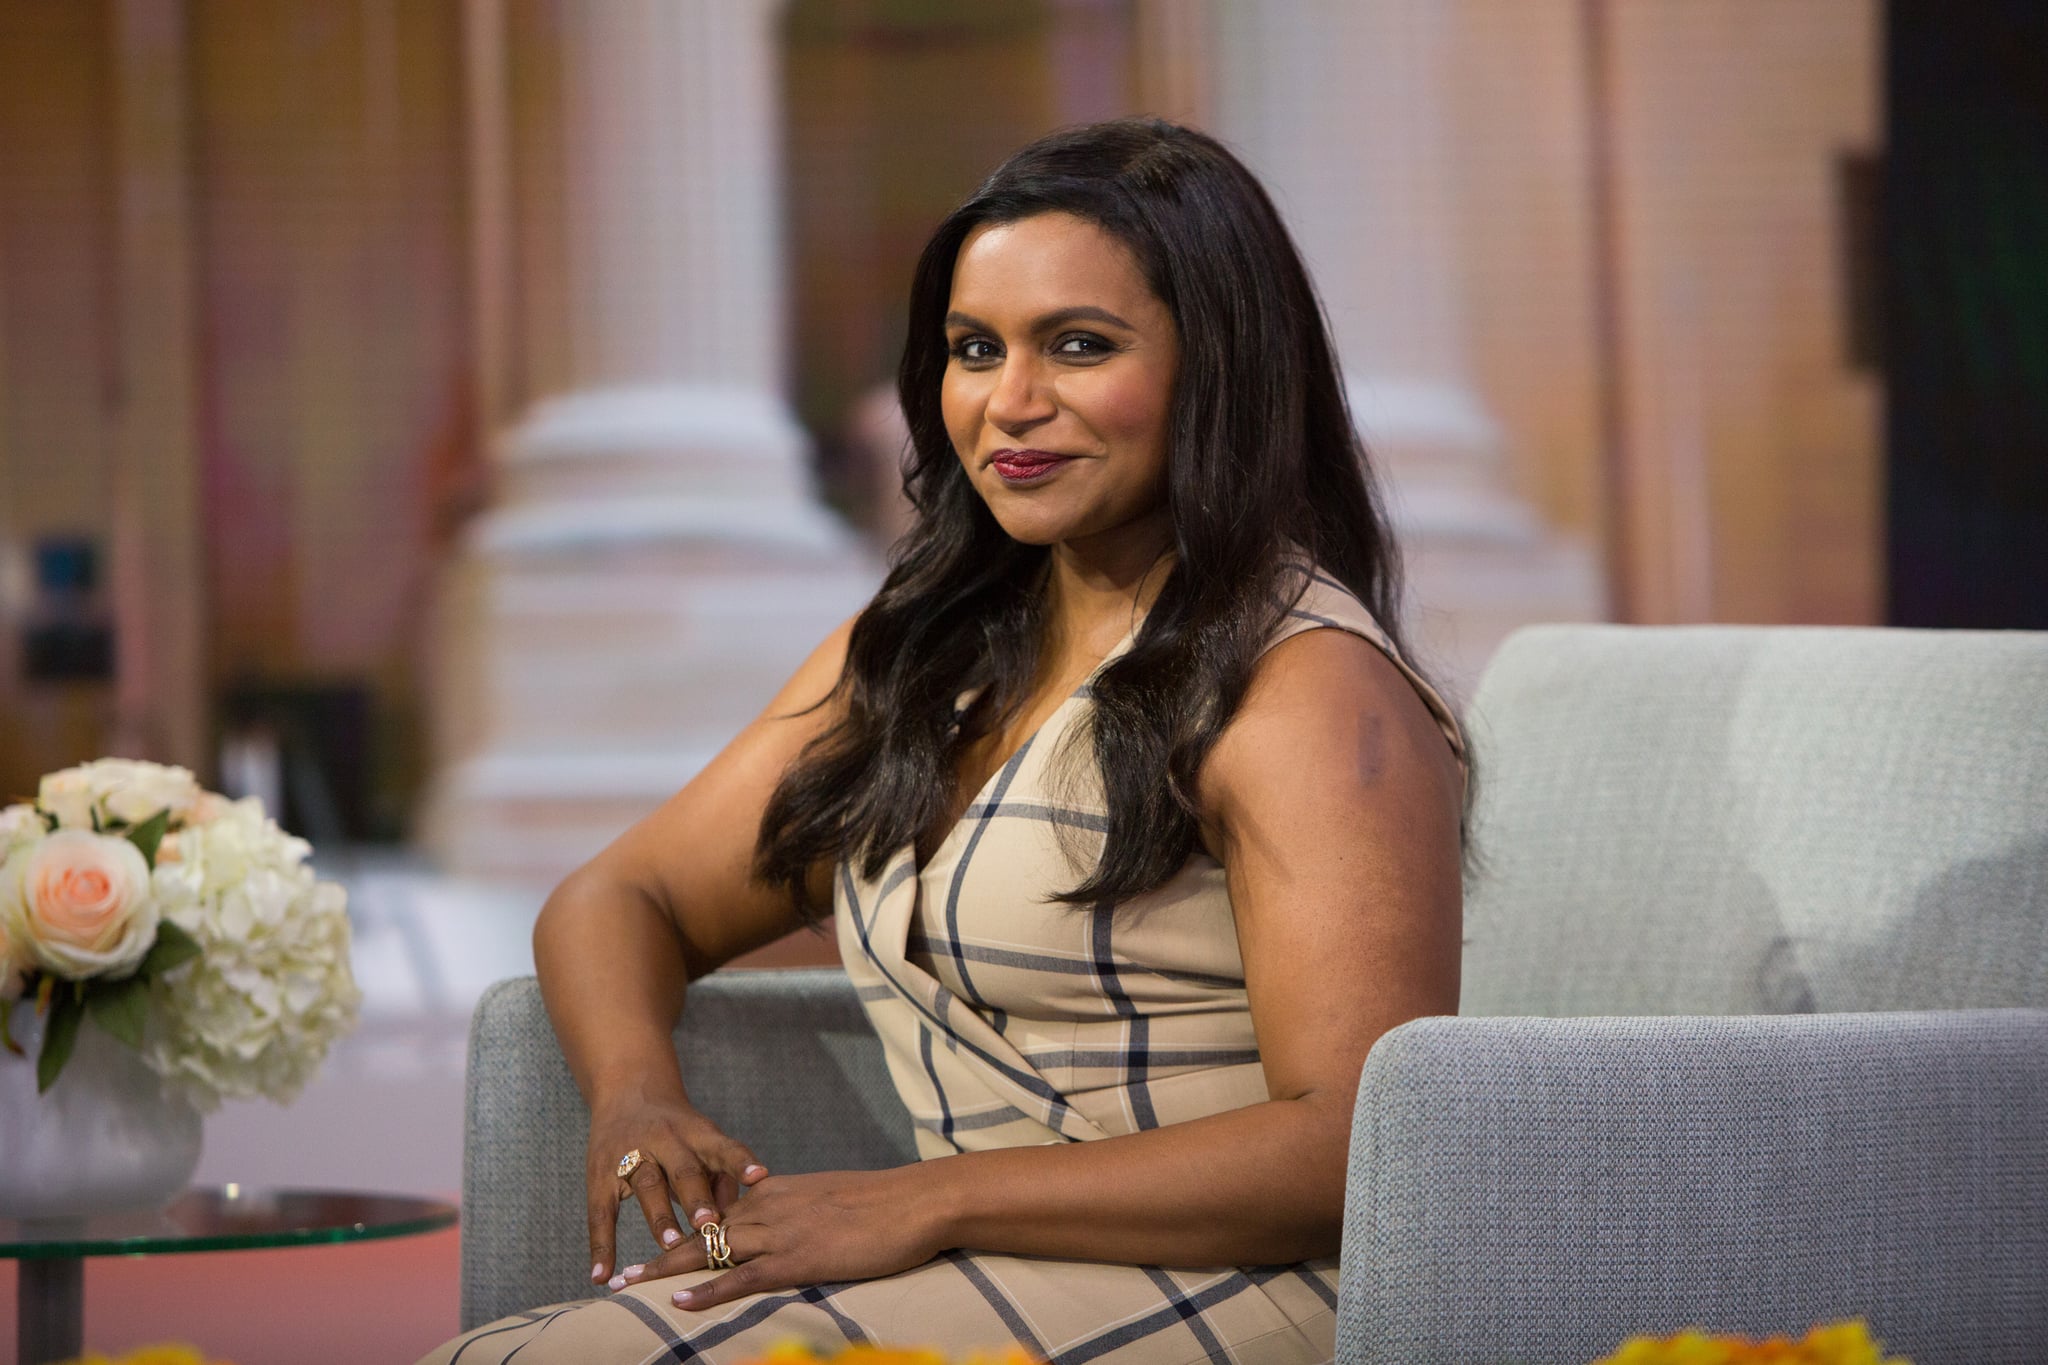 TODAY -- Pictured: Mindy Kaling on Thursday, June 7, 2018 -- (Photo by: Nathan Congleton/NBC/NBCU Photo Bank via Getty Images)